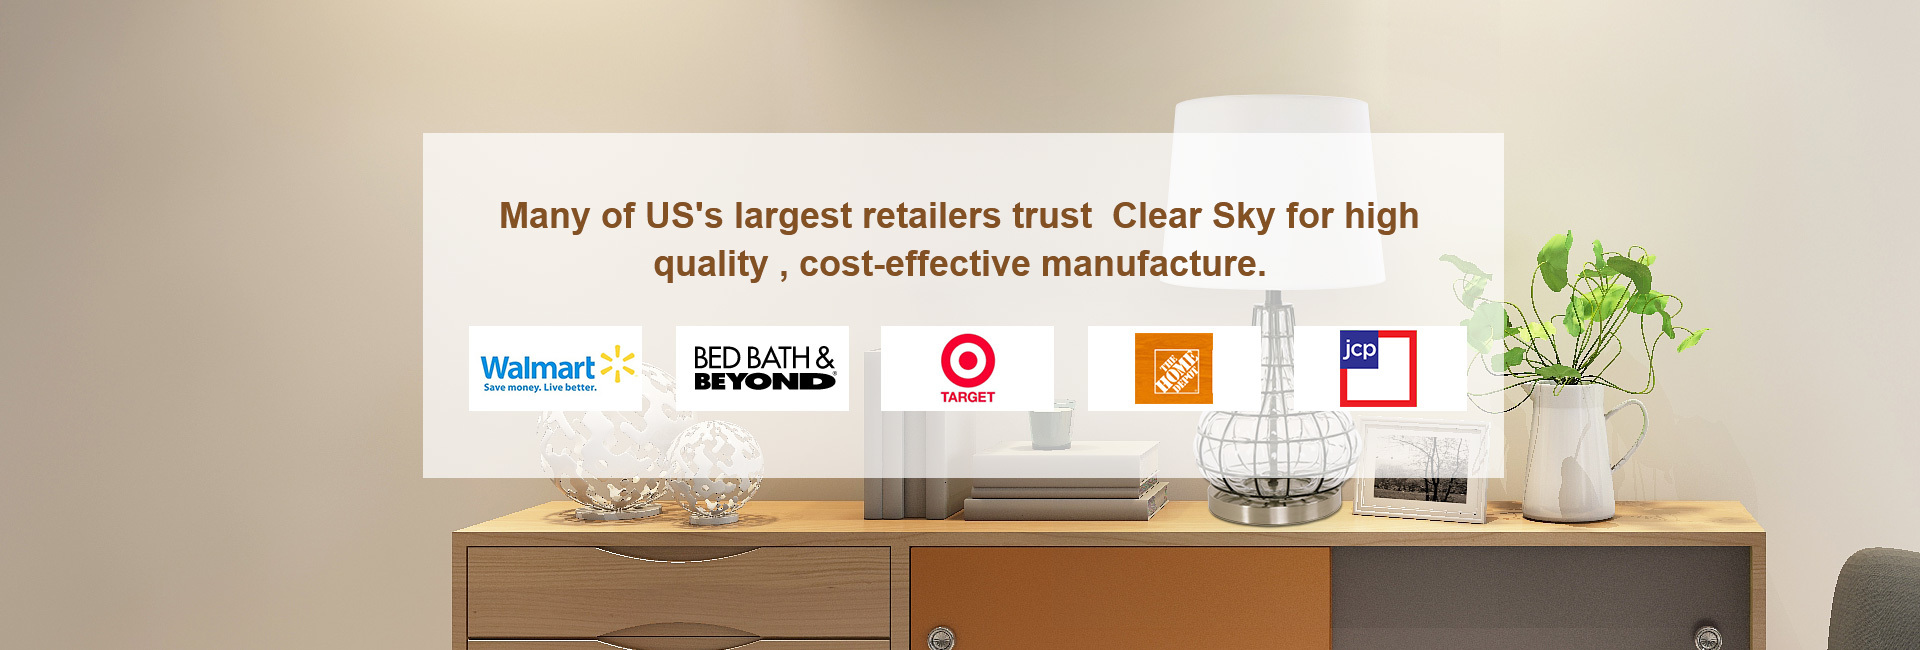 Many of US's largest retailers trust Clear Sky for high quality,cost-effective manufacture